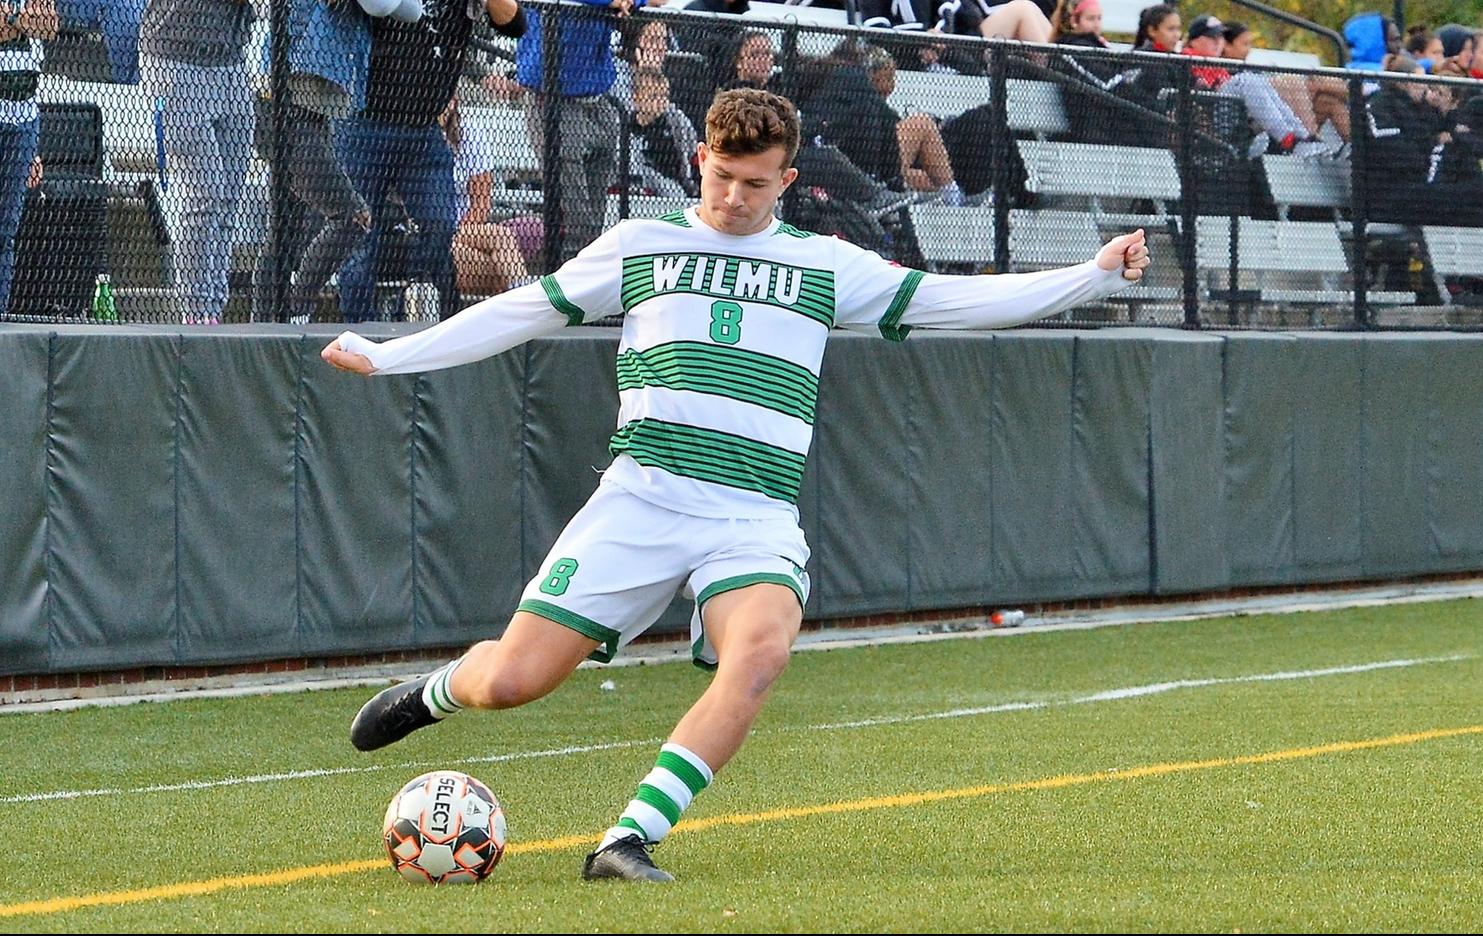 File photo of Ben Jordan who scored two goals and added an assist at Chestnut Hill. Copyright 2019; Wilmington University. All rights reserved. Photo by James Jones. October 19, 2019 vs. Caldwell.